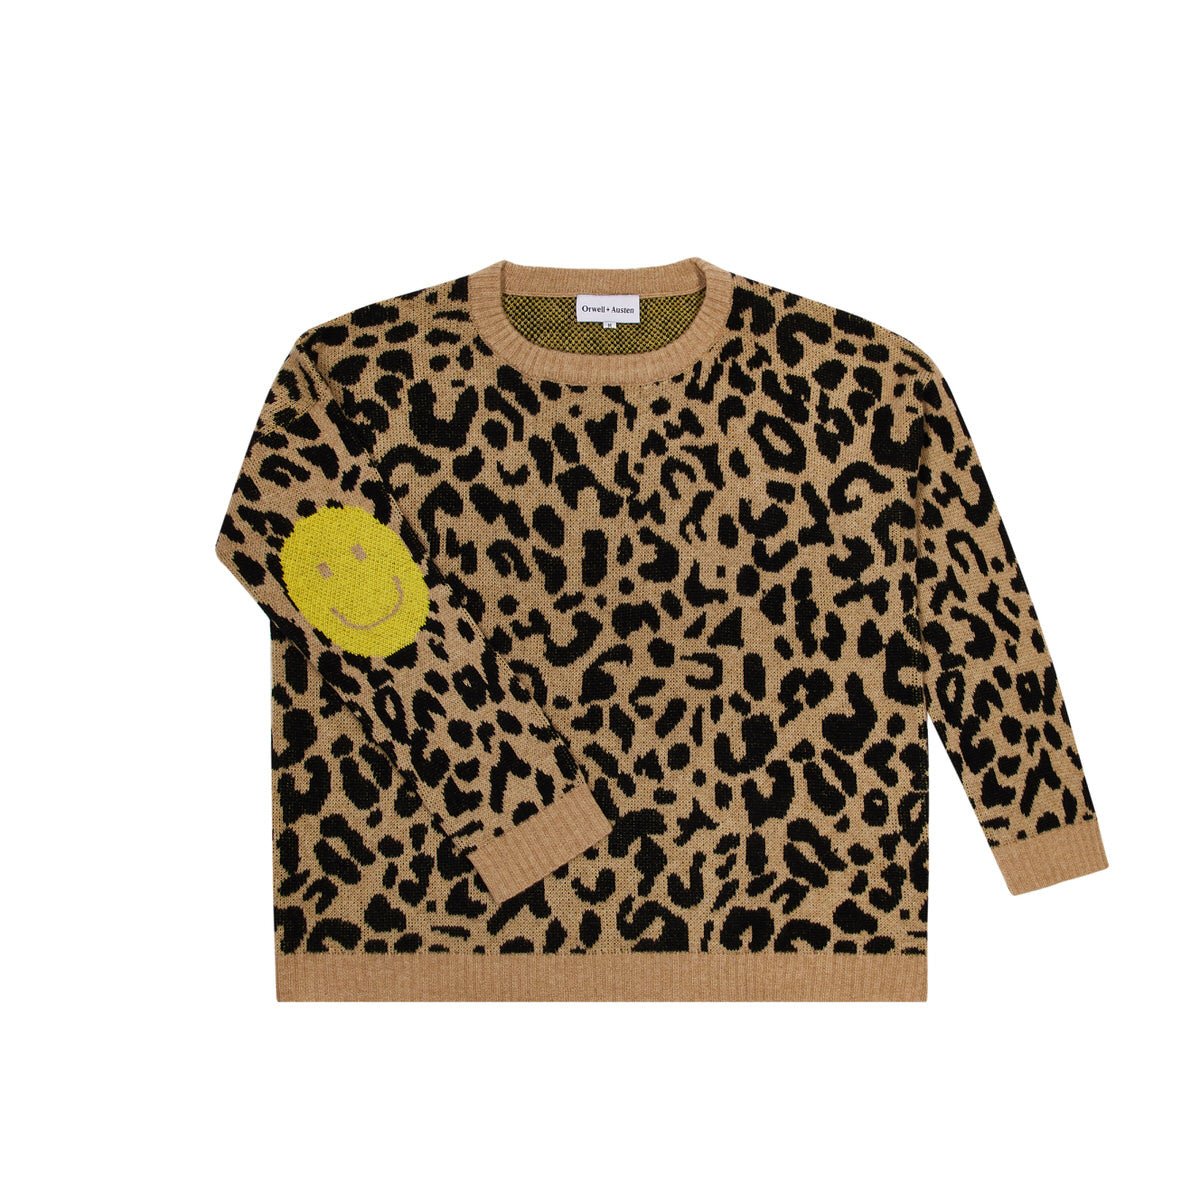 Leopard Print Collection